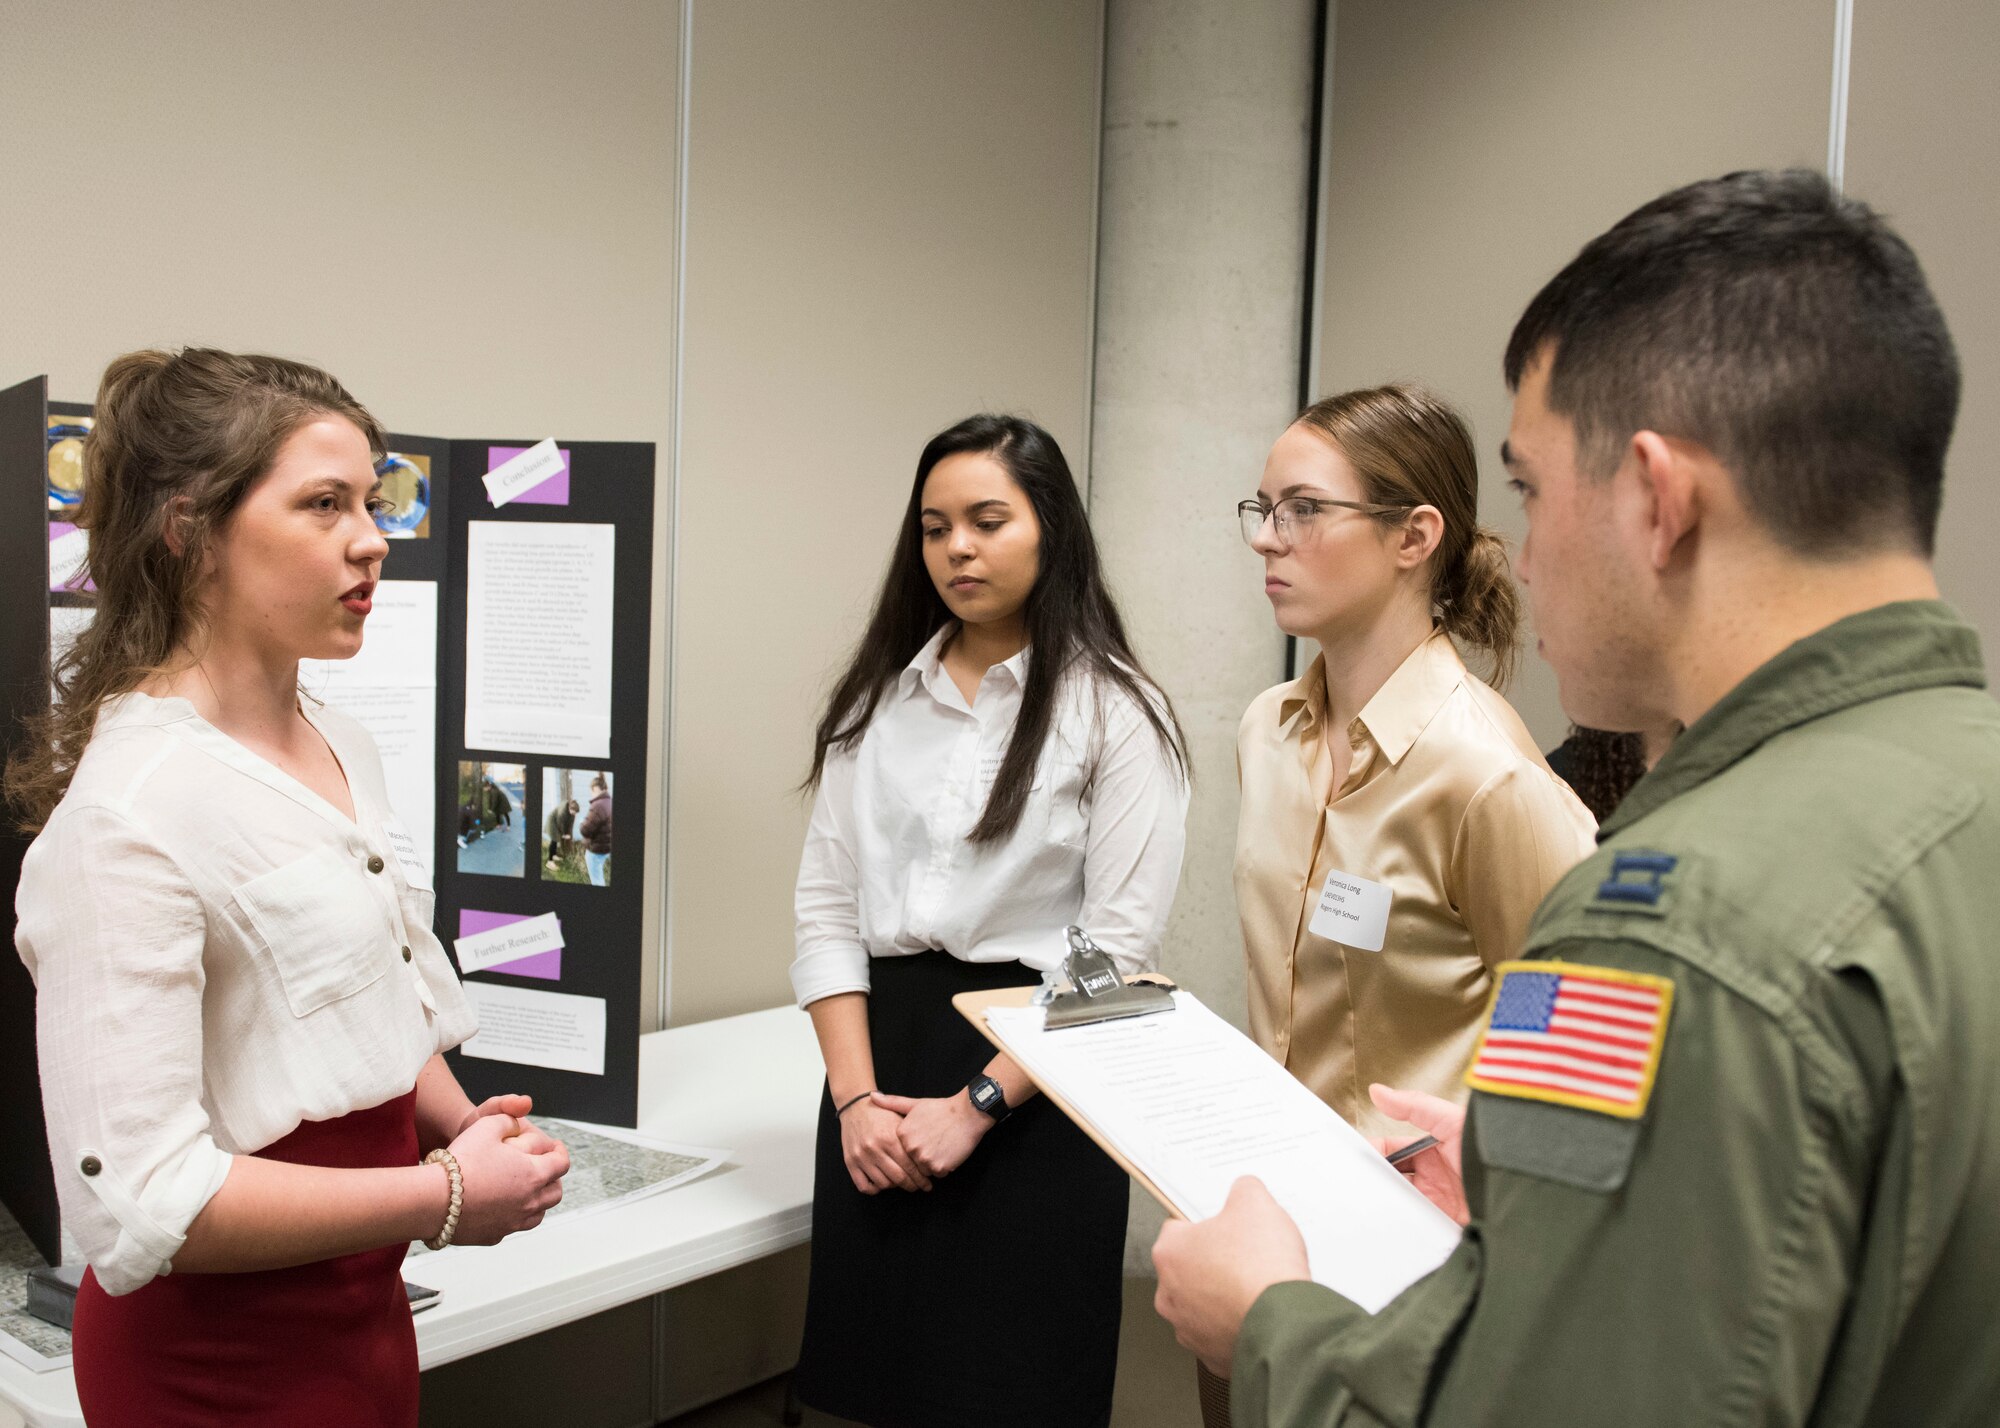 Capt. Joseph Springfield, 384th Air Refueling Squadron pilot, reviews the a project during the Eastern Washington Regional Science and Engineering Fair at the Spokane Washington State University campus, Washington, March 15, 2018. Team Fairchild officers and Airmen were invited by WSU to help with the preliminary judging of the students projects. (U.S. Air Force photo/Senior Airman Ryan Lackey)